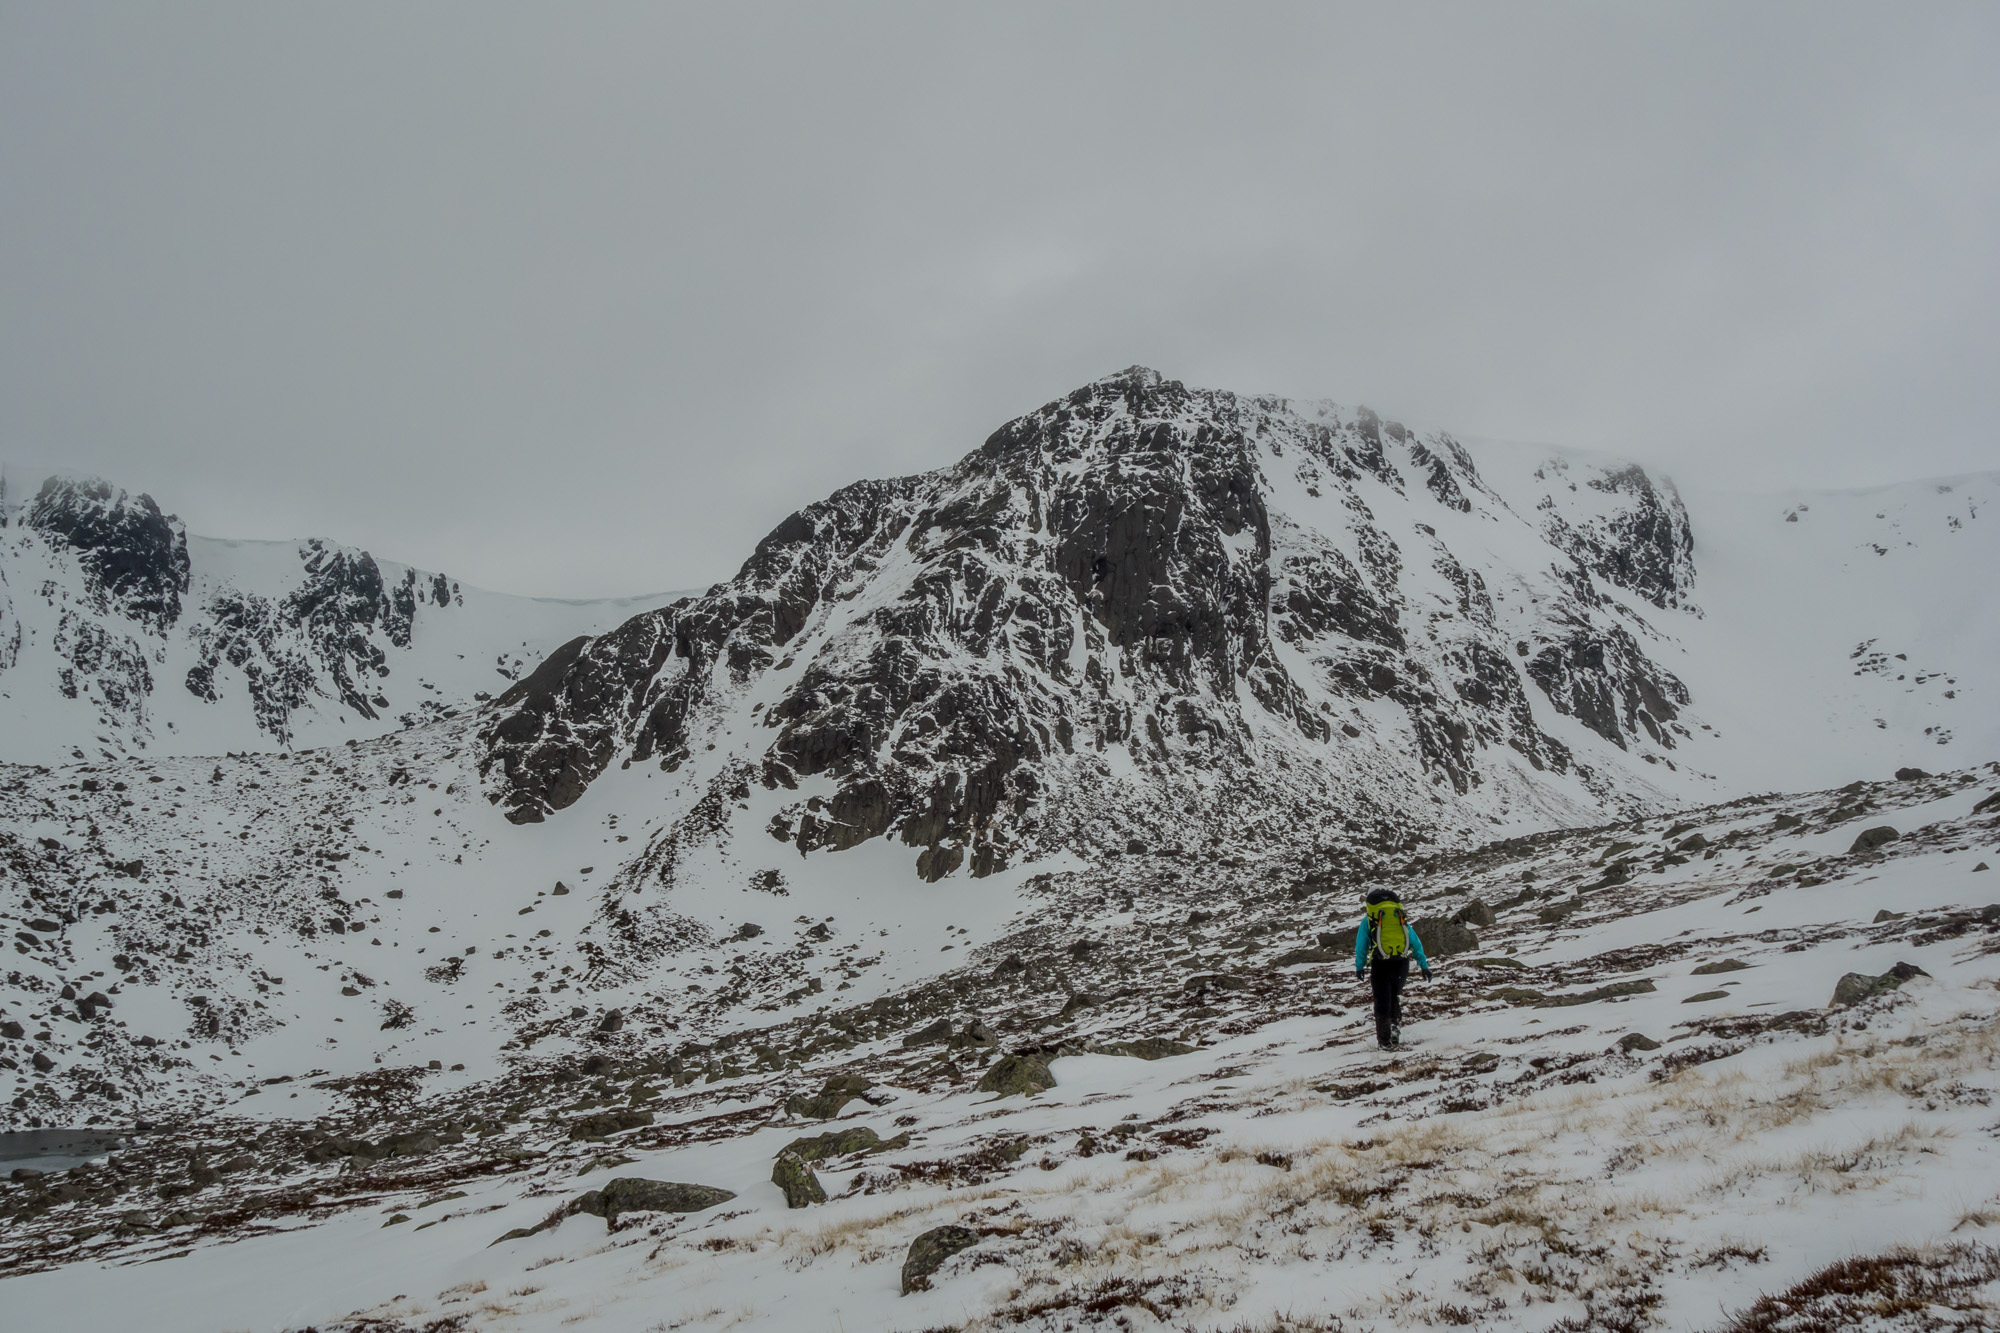 Crossing the moor on the way to Dividing Buttress with the route Slab and Arete on the left hand skyline